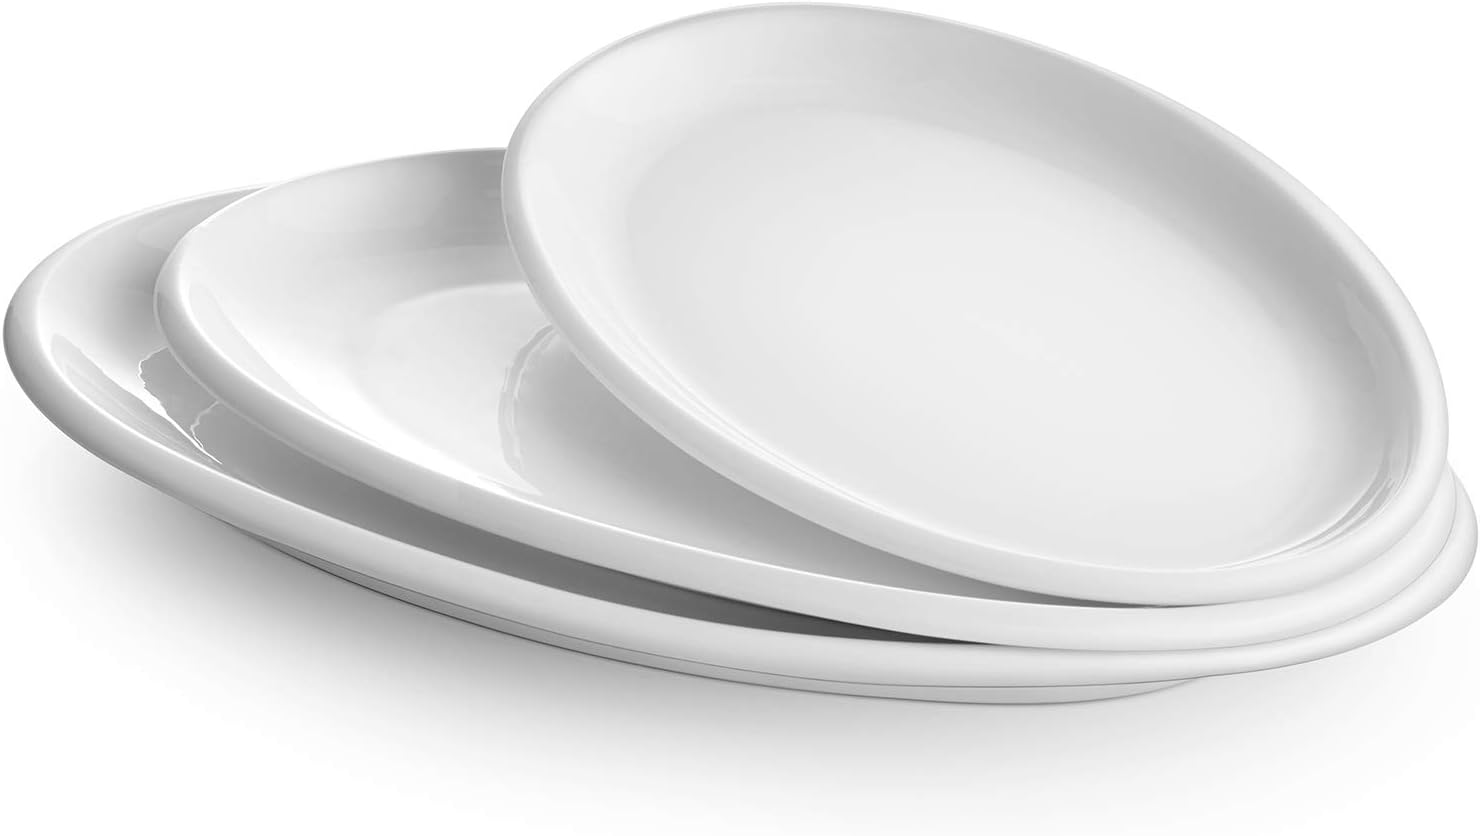 Where Can I Find Cheap Serving Dishes?